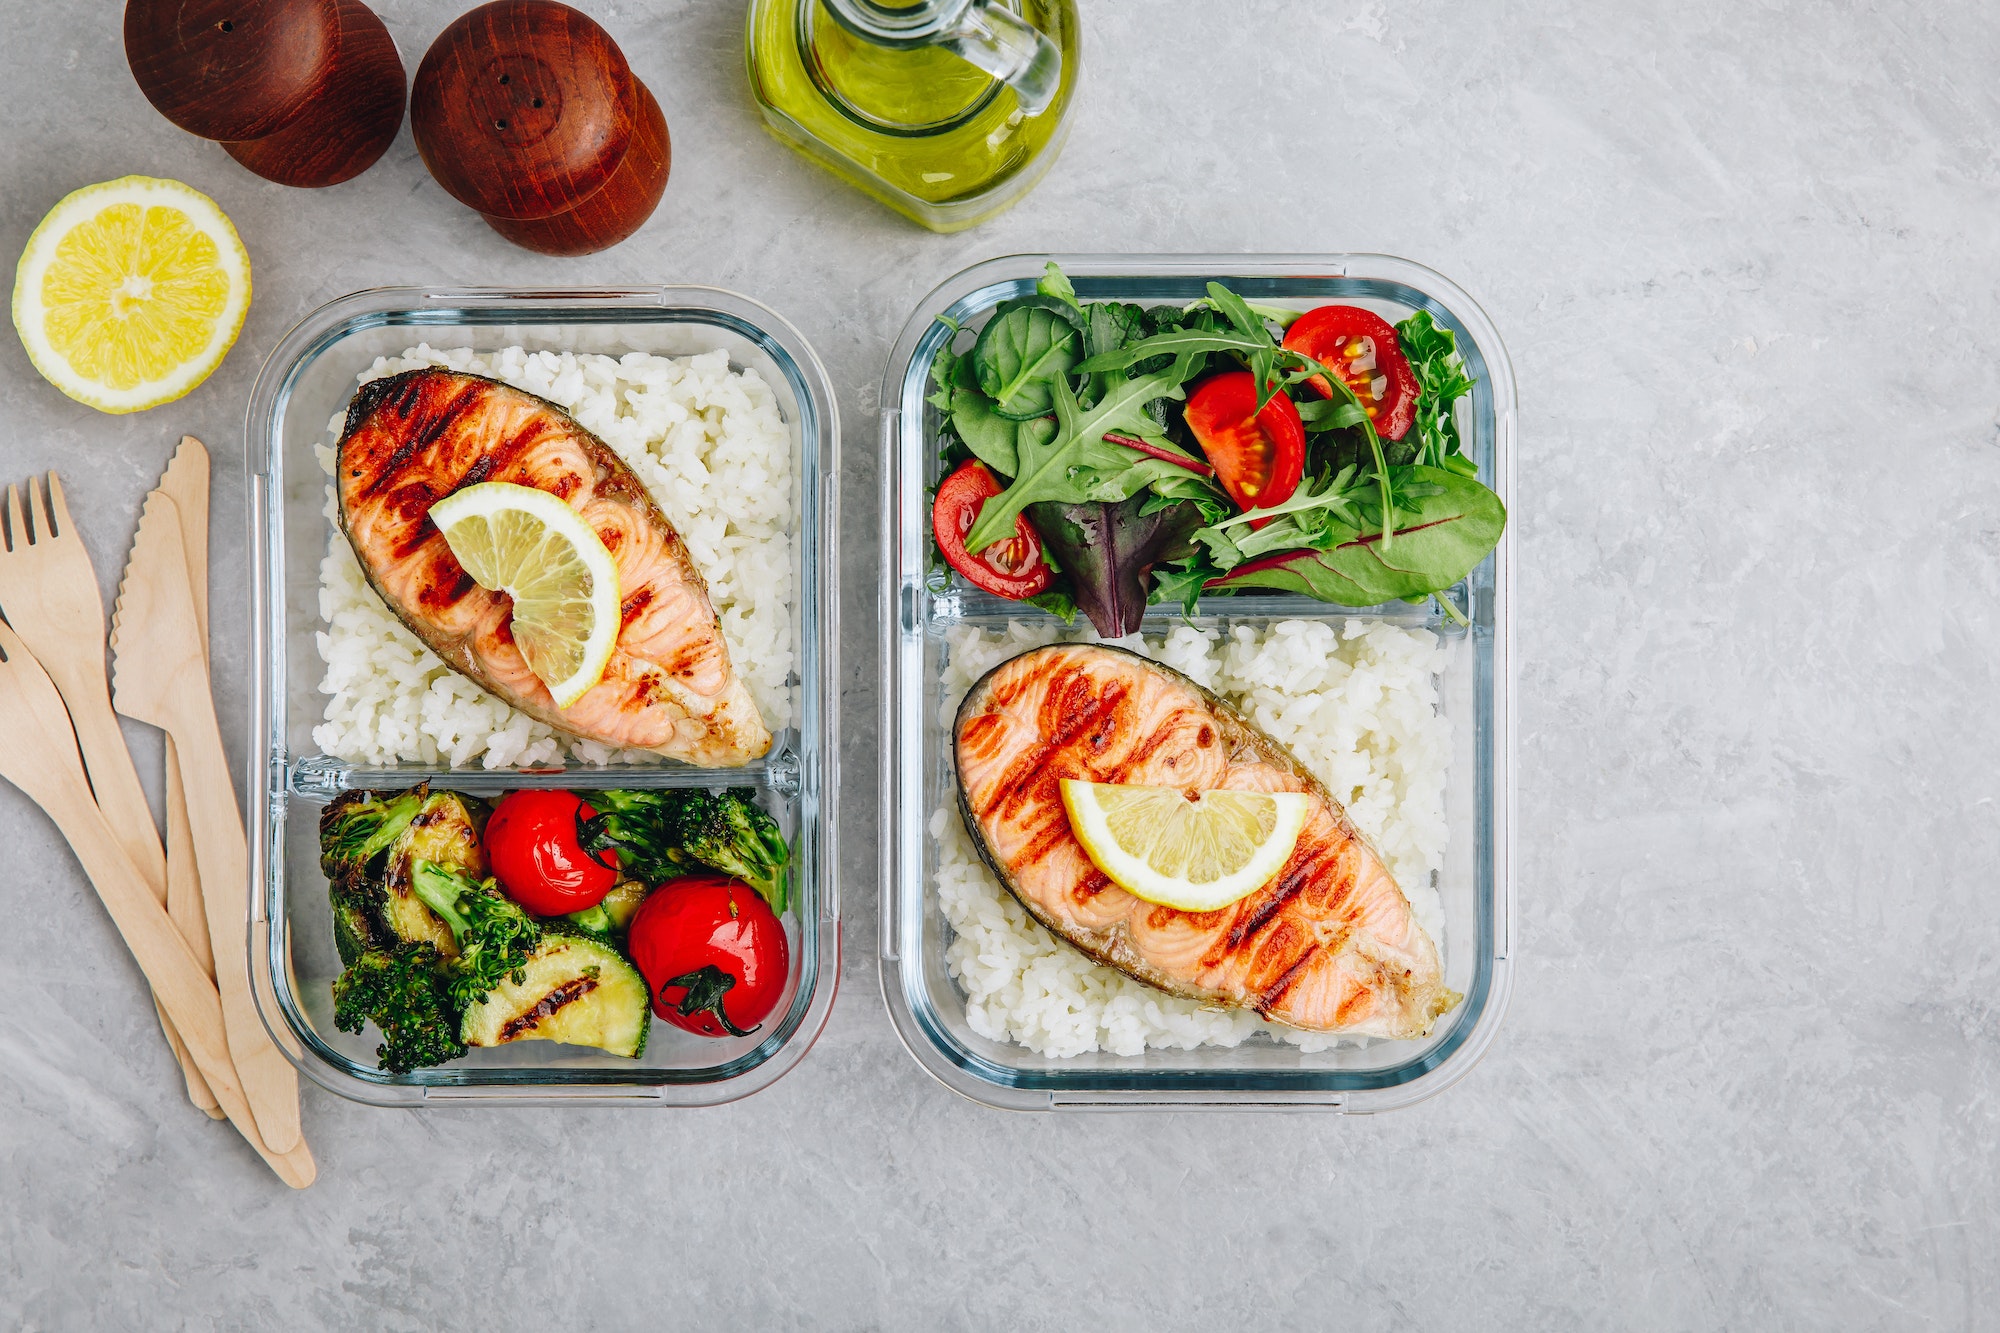 Meal prep containers with salmon and rice, green salad and baked vegetables.